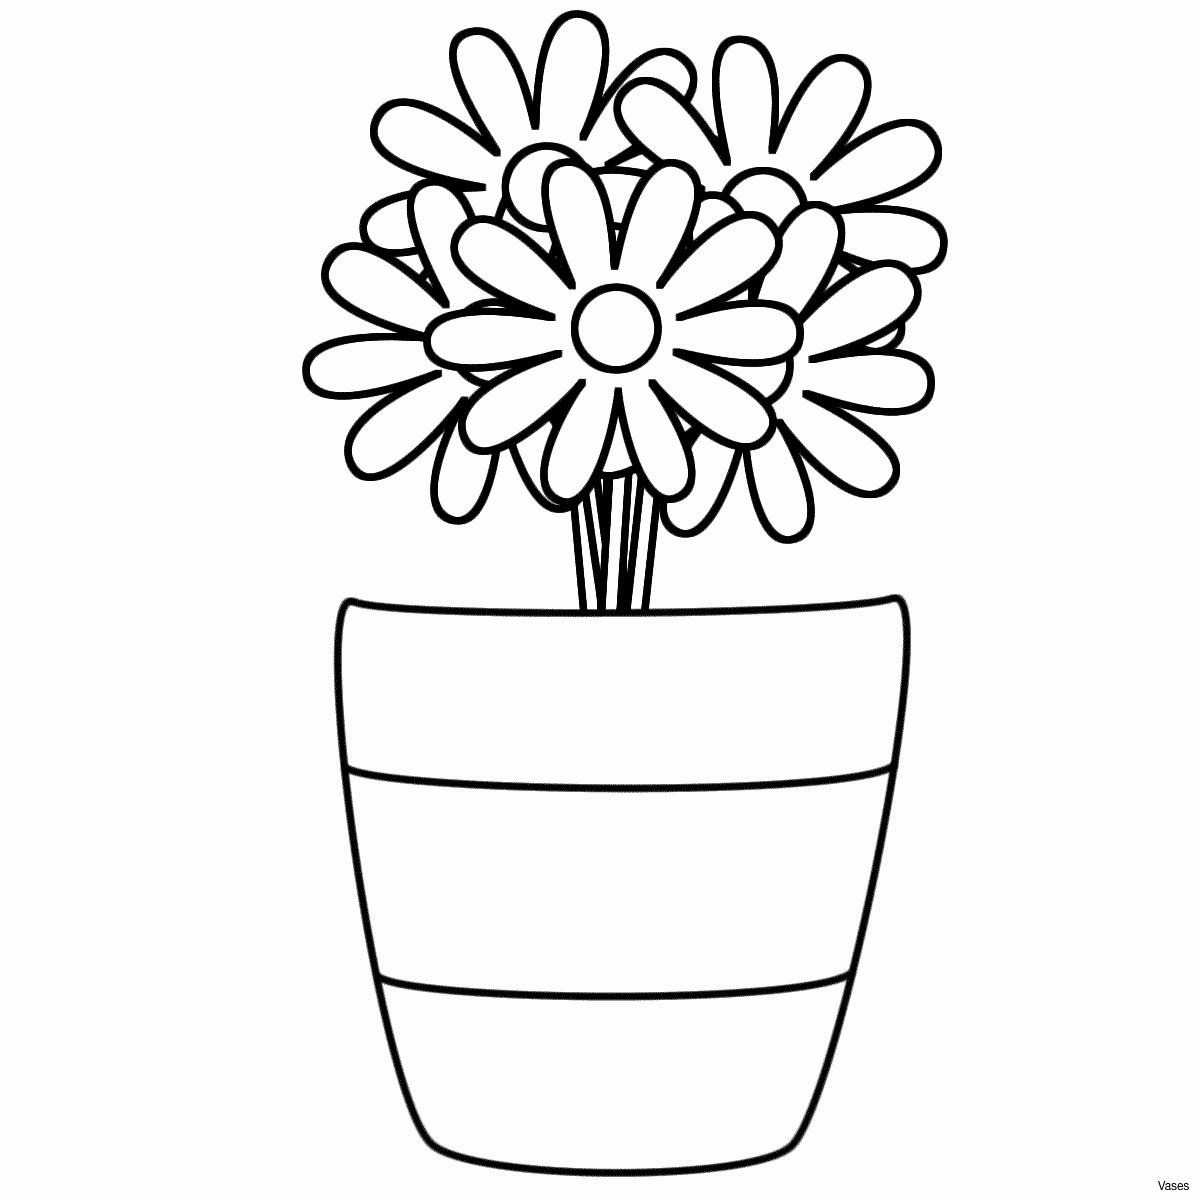 glass flowers and vase of christmas coloring pages stained glass free printable coloring pages throughout christmas coloring pages stained glass free coloring pages kids new best vases flower vase coloring page